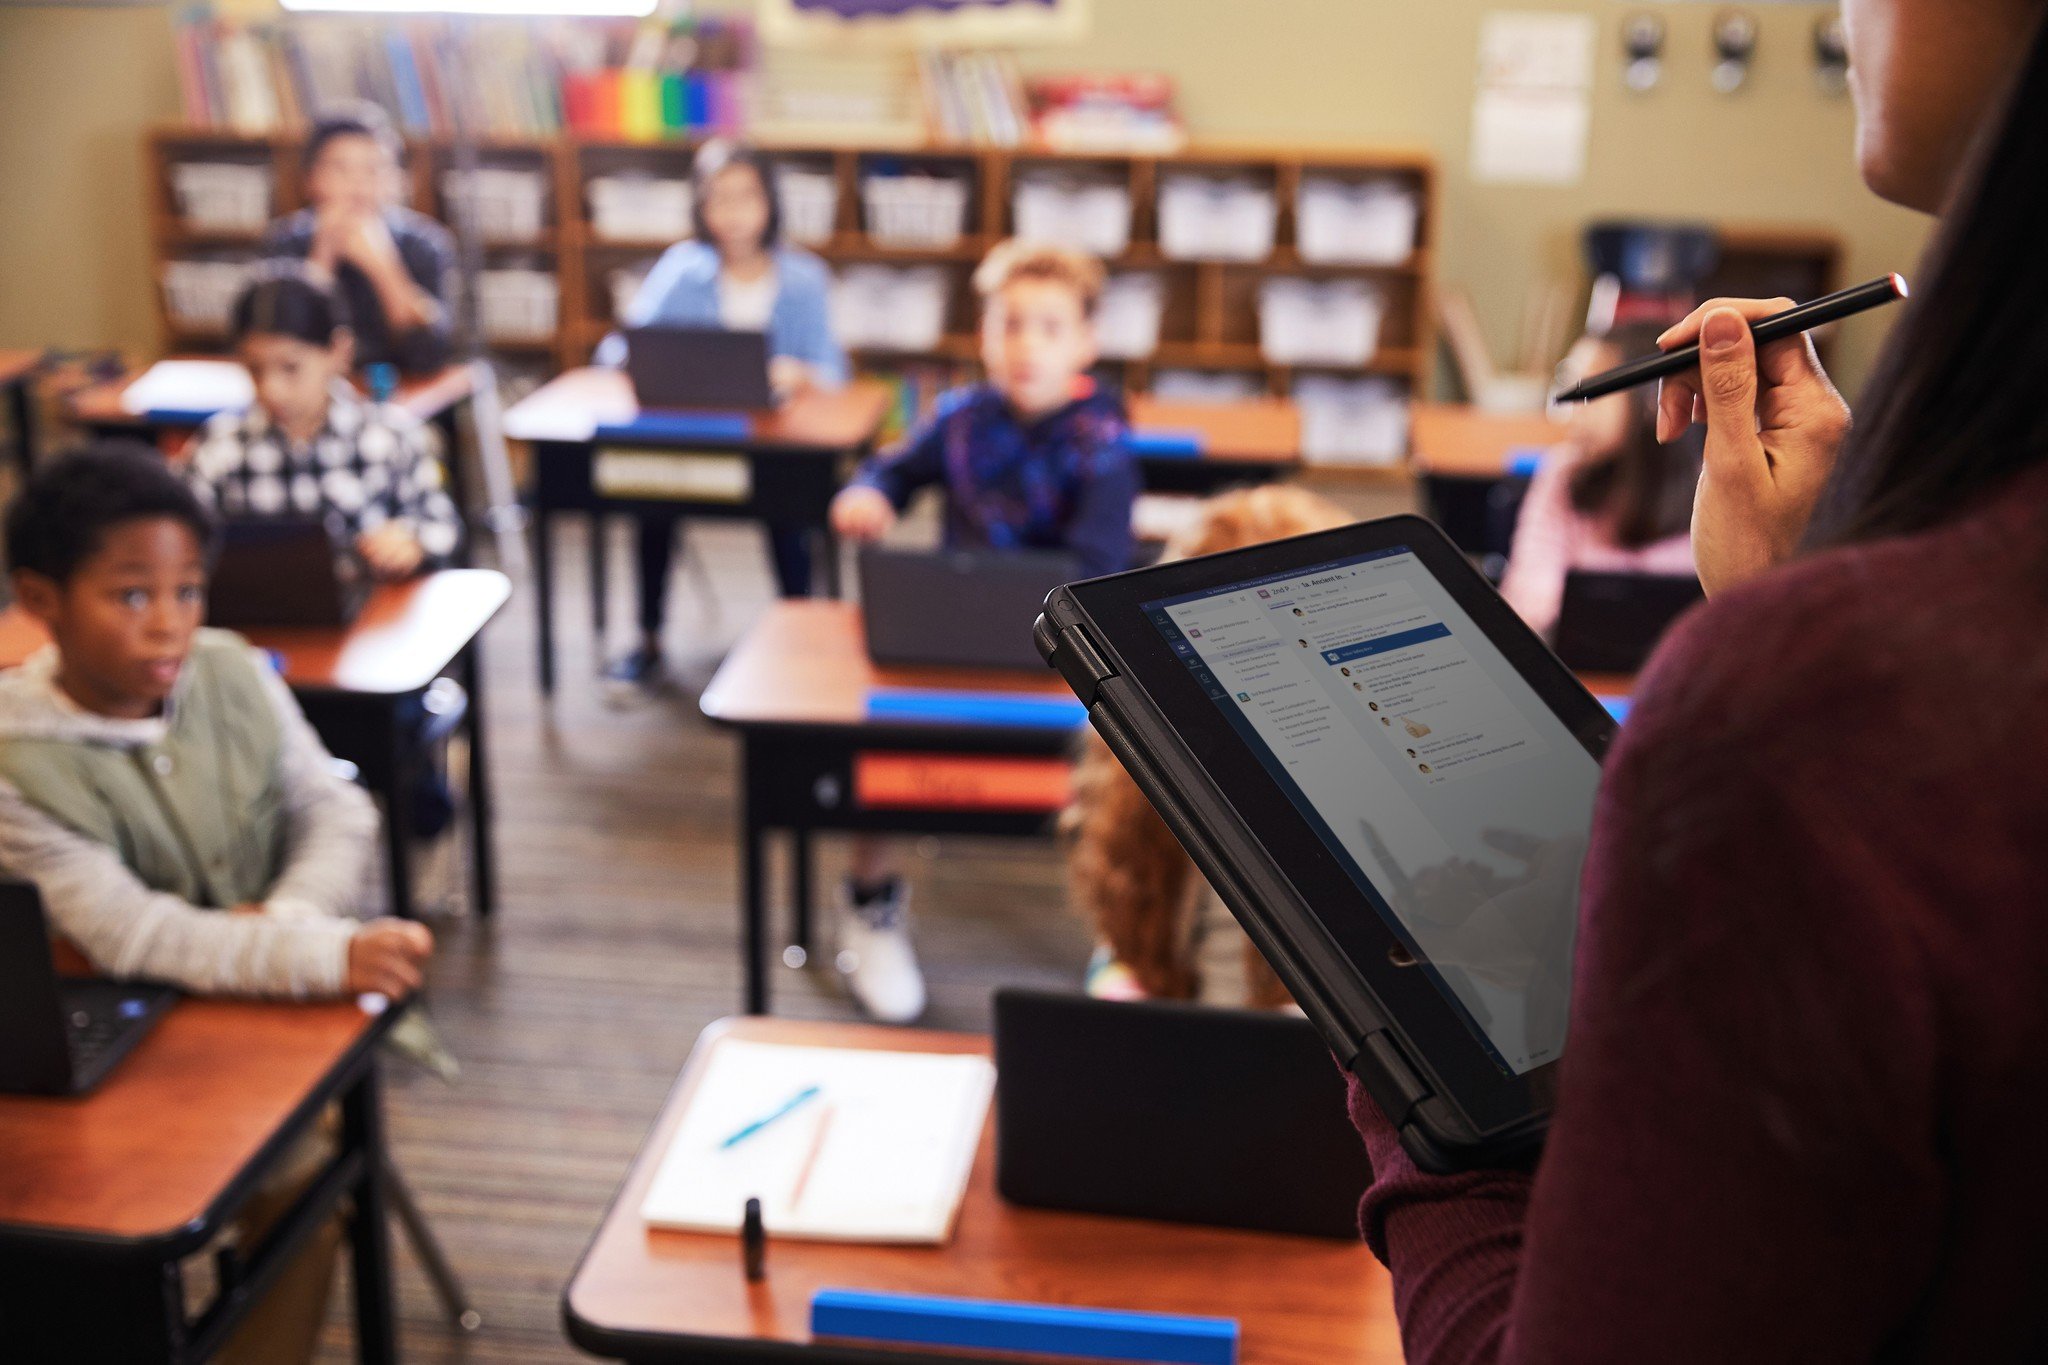 Windows sees U.S. education market growth among low-end devices